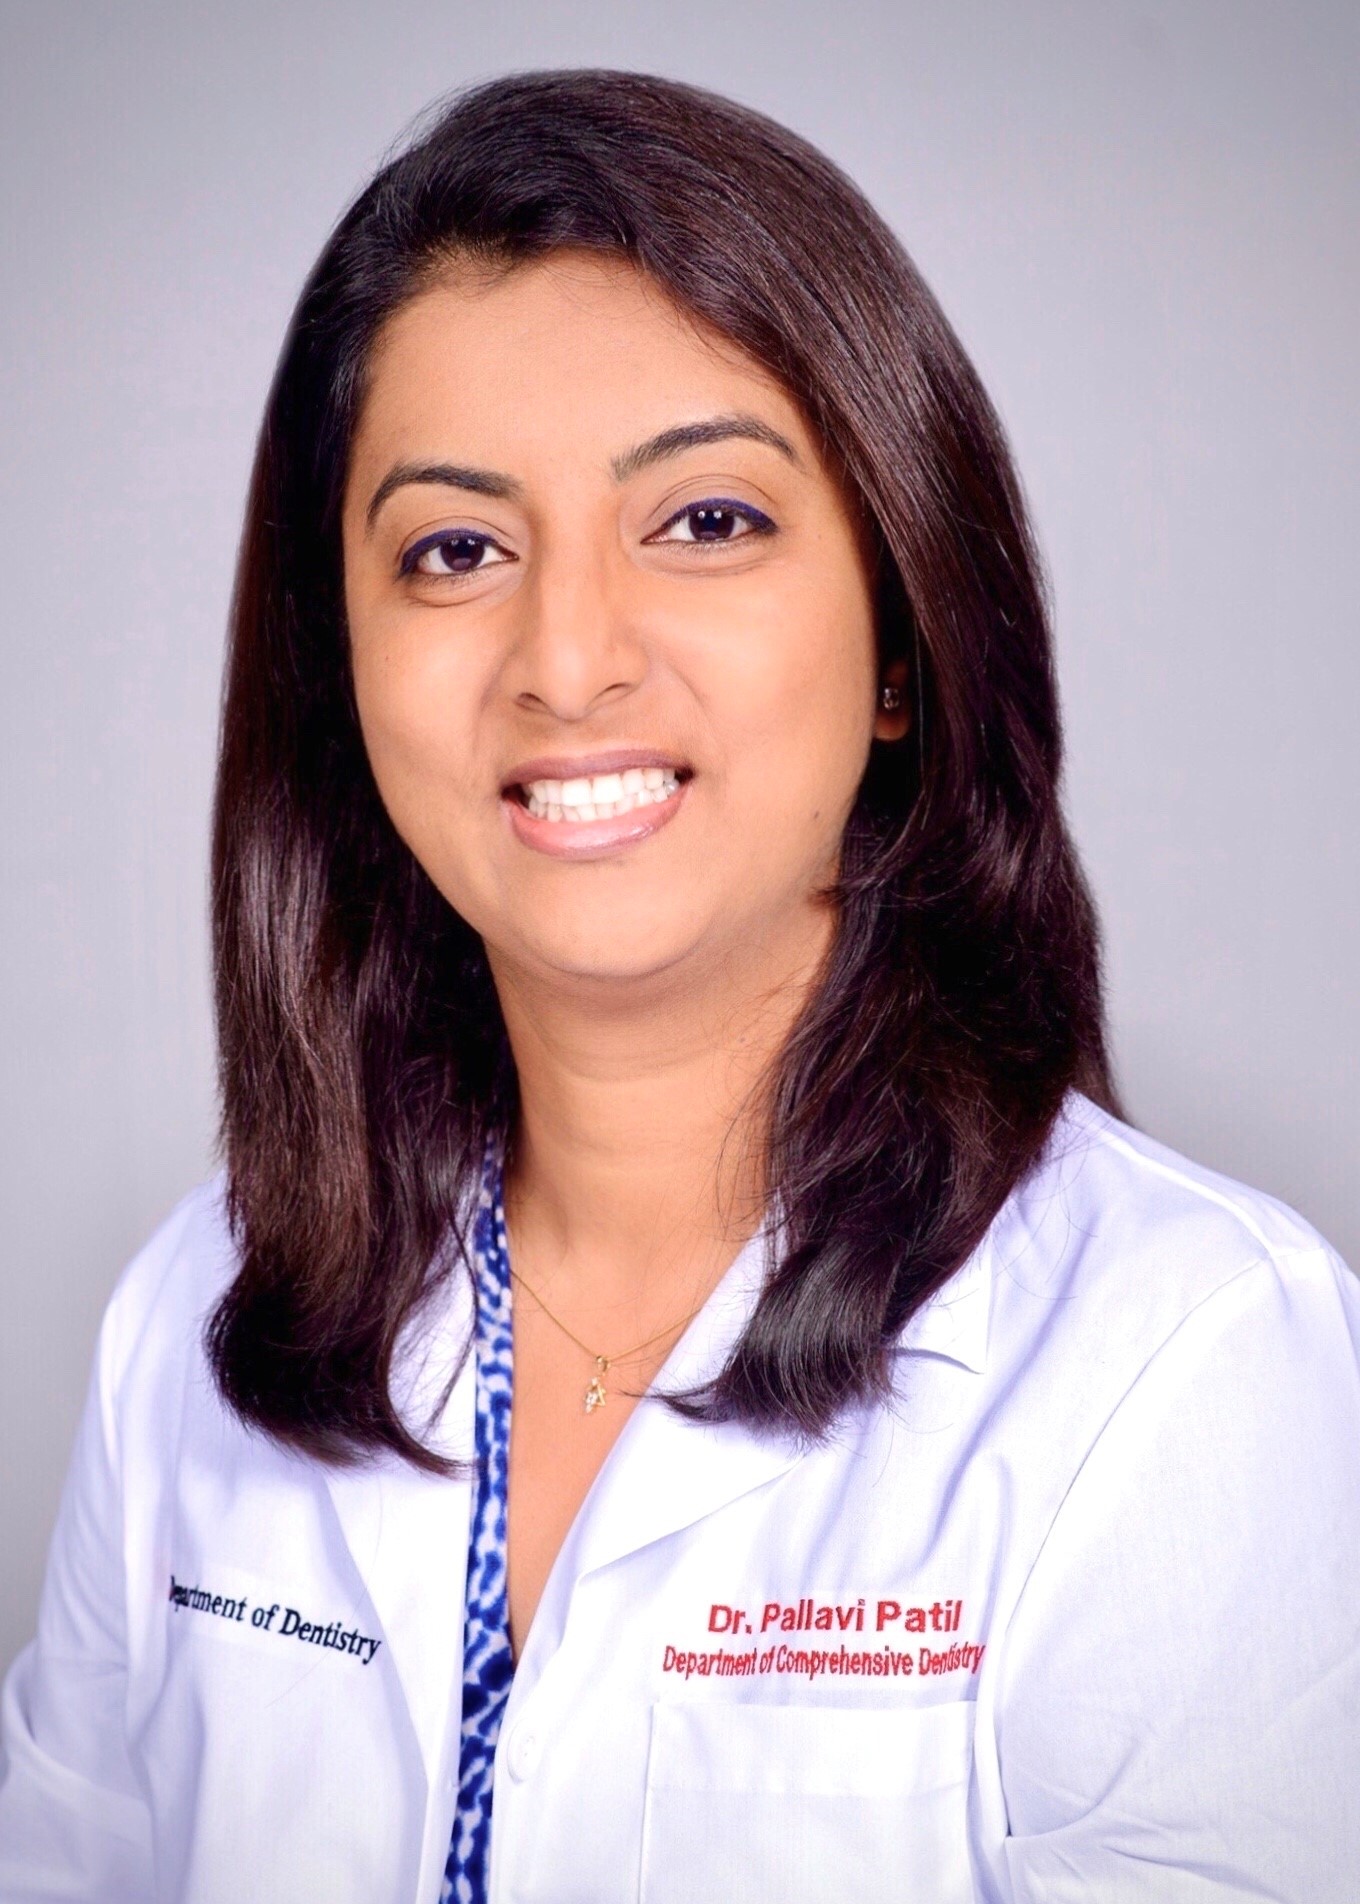 Image of Dr. Pallavi Patil at the University of Louisville School of Dentistry